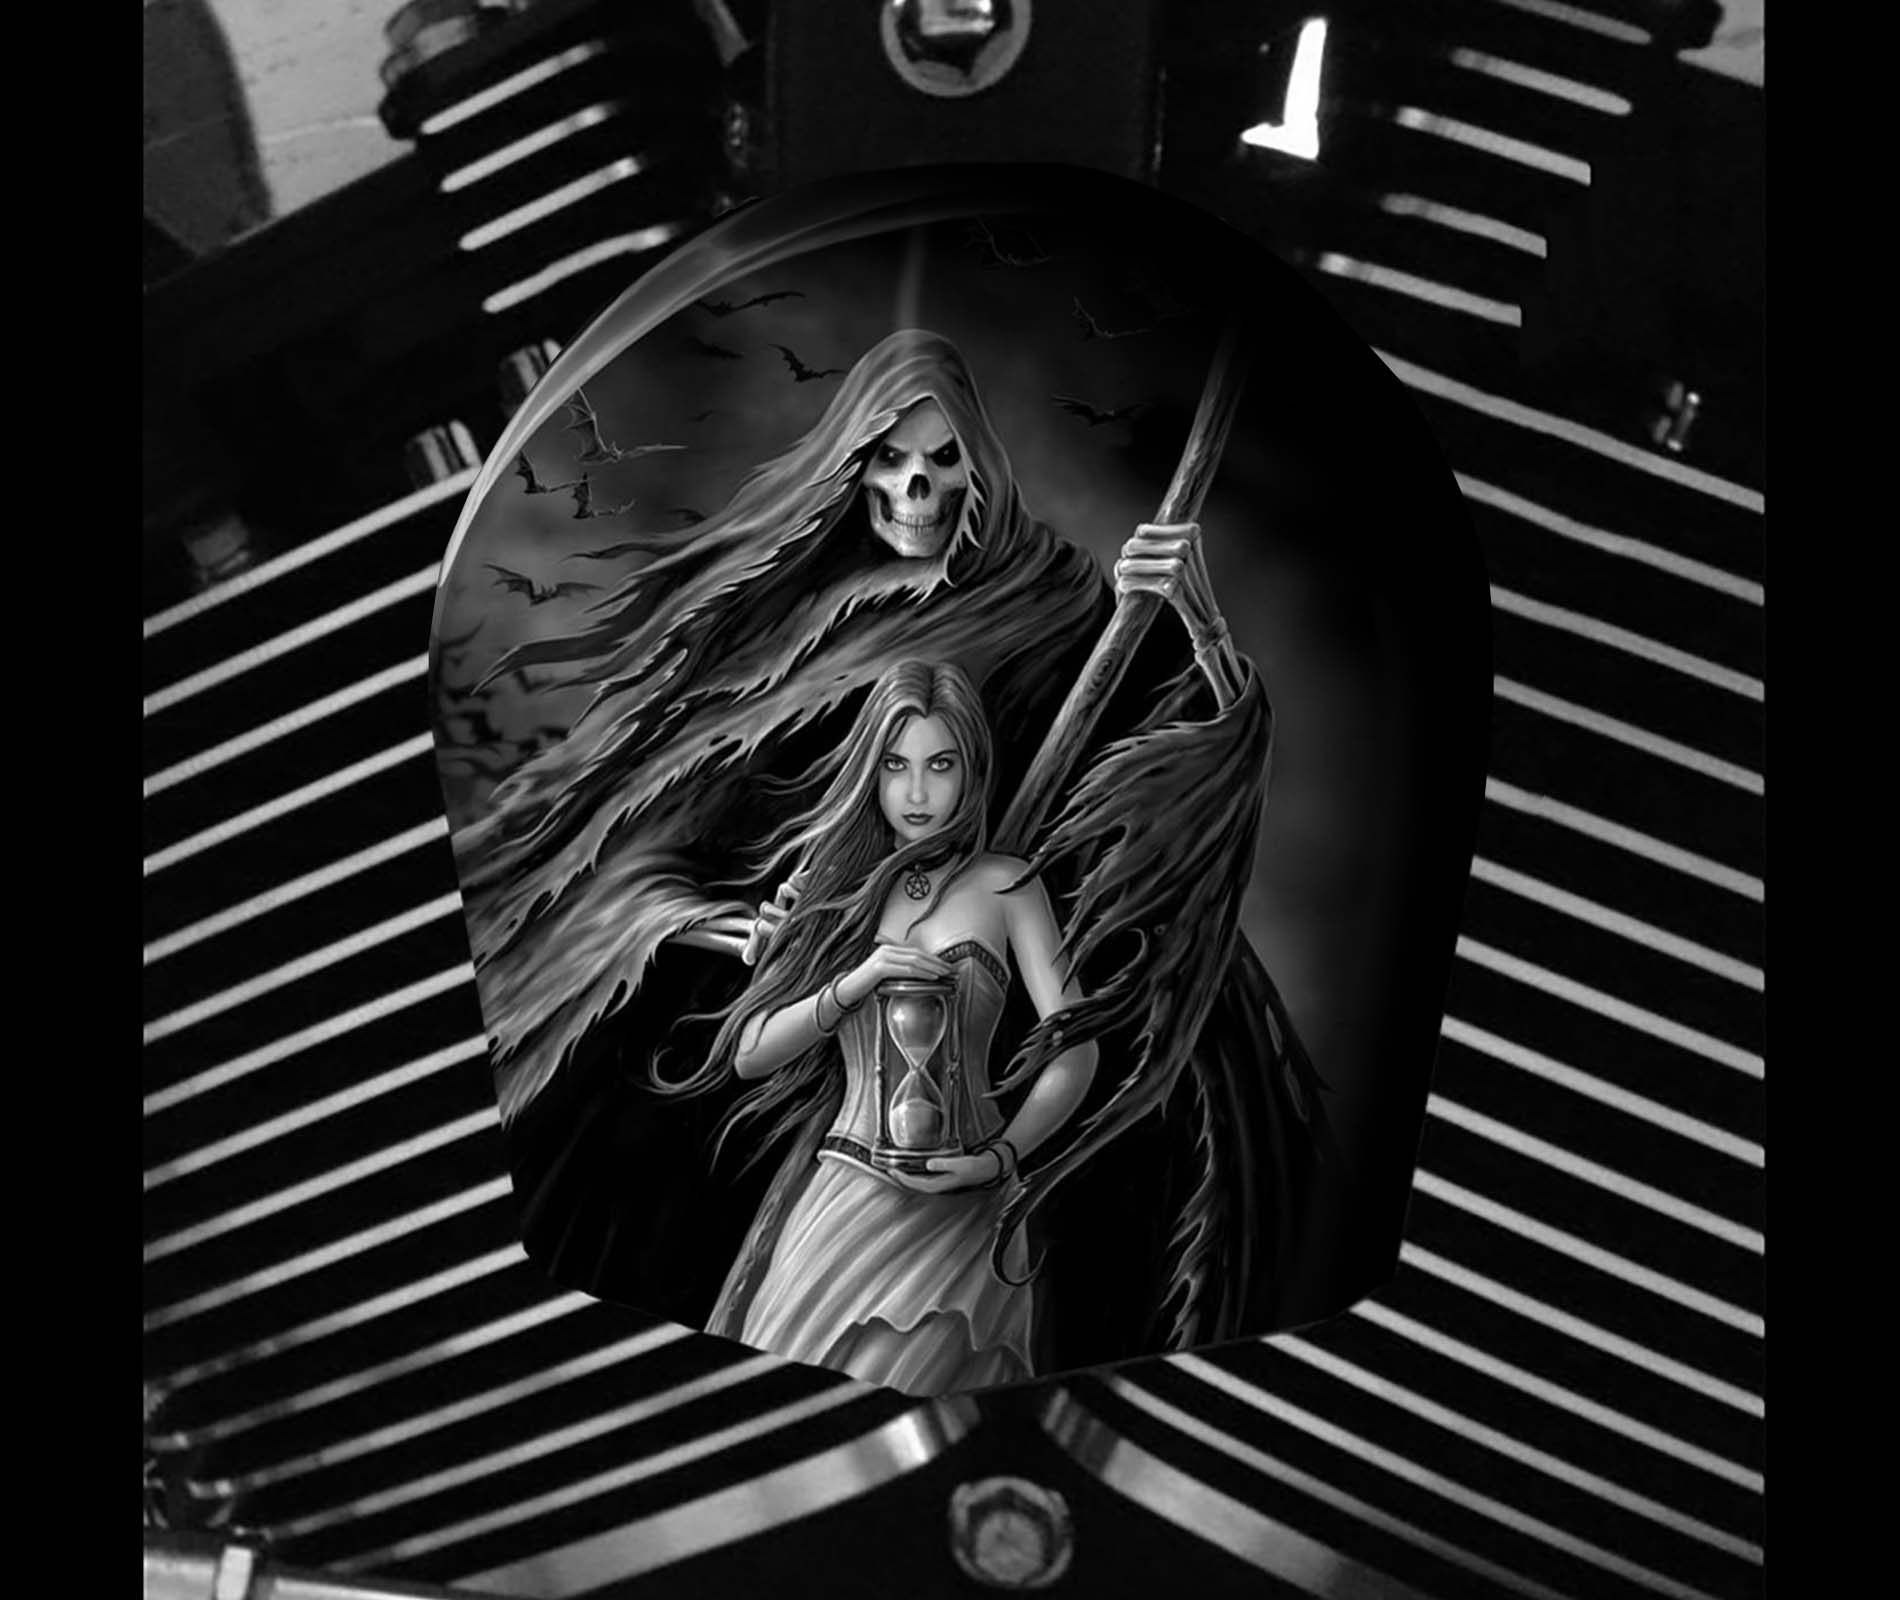 Custom Horn Cover - Reaper And Girl With Hourglass (BW)